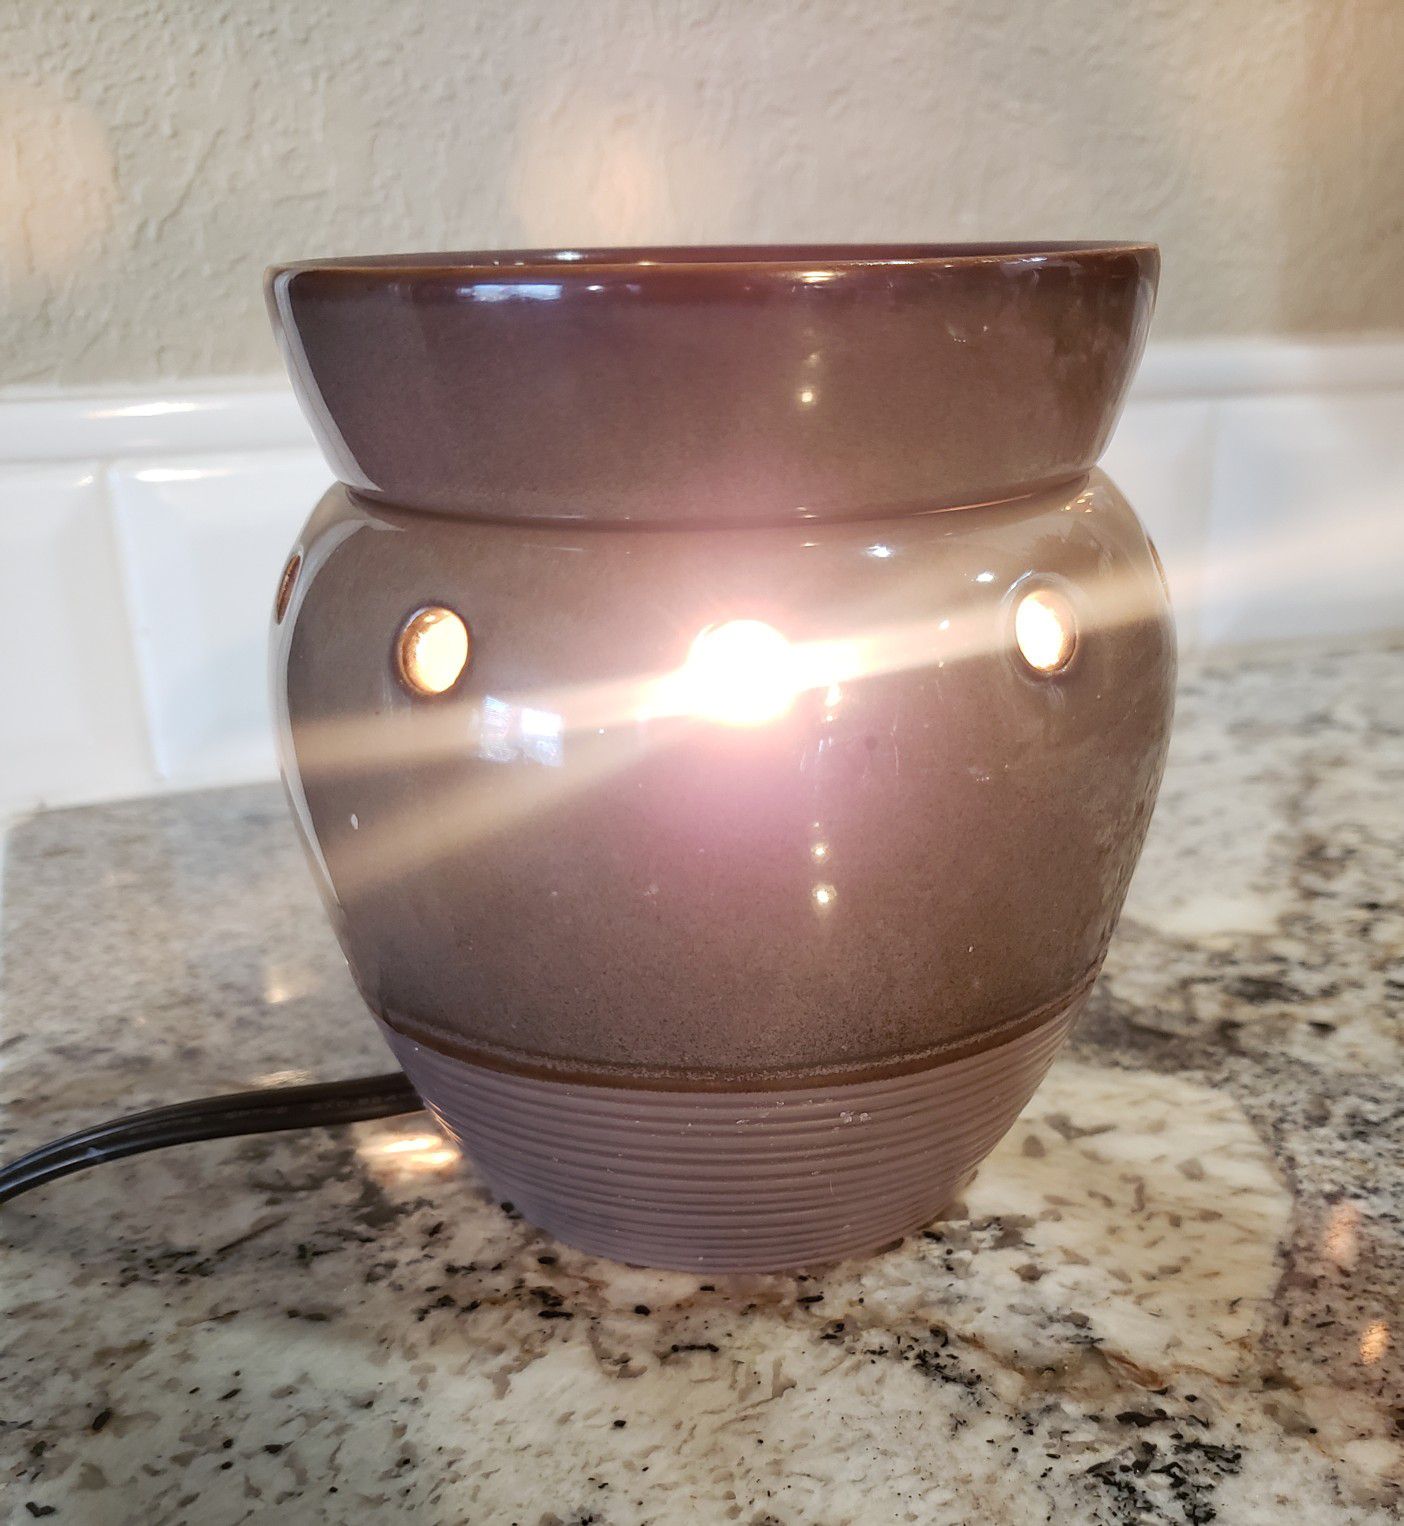 Scentsy mid size warmer